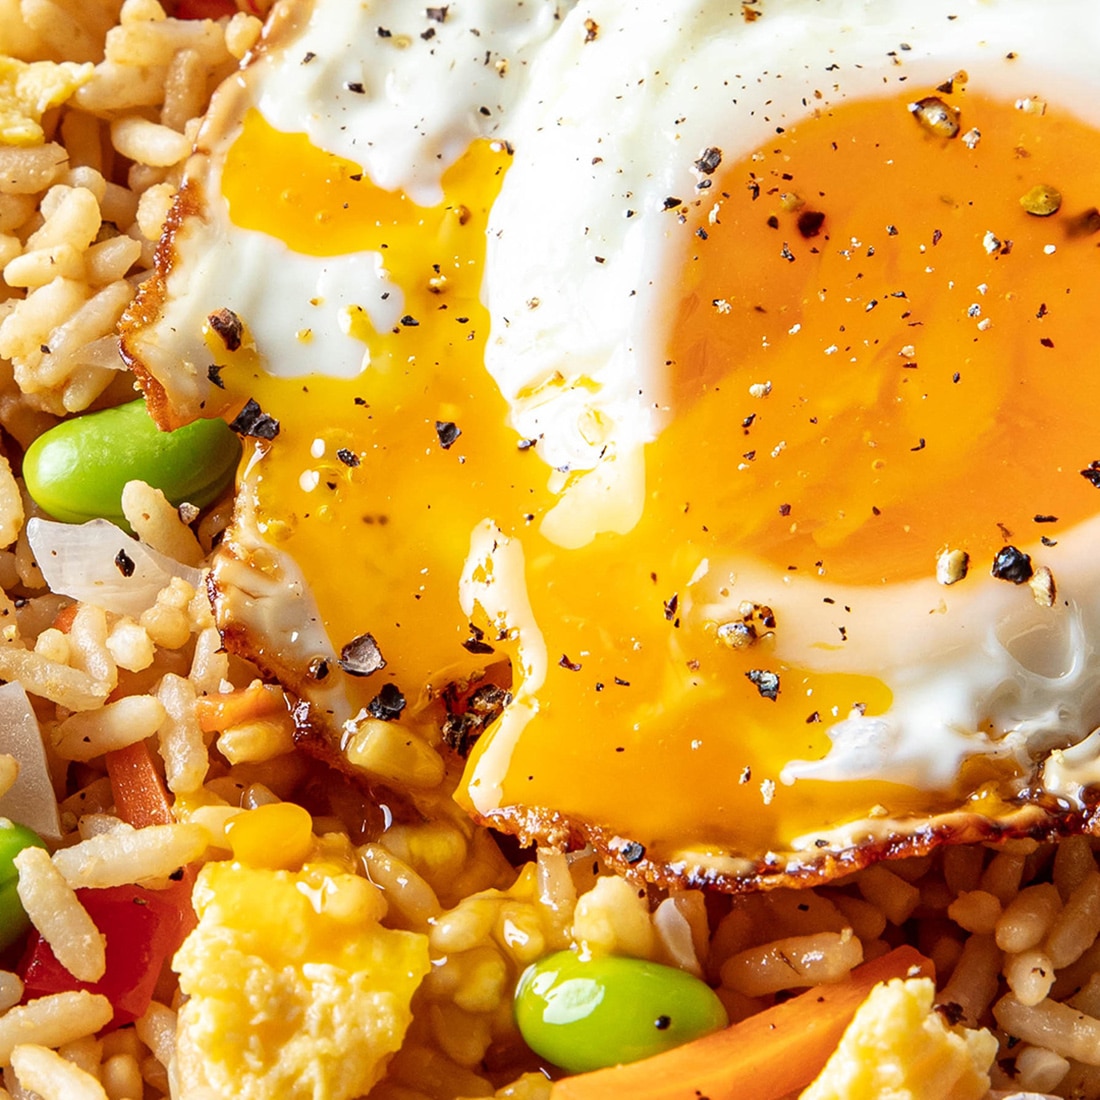 A super close-up of an amazing sunny side up egg over InnovAsian Vegetable Fried Rice. The edges are crispy and the yolk is broken and running down into the rice, seasoned with pepper and furikake.